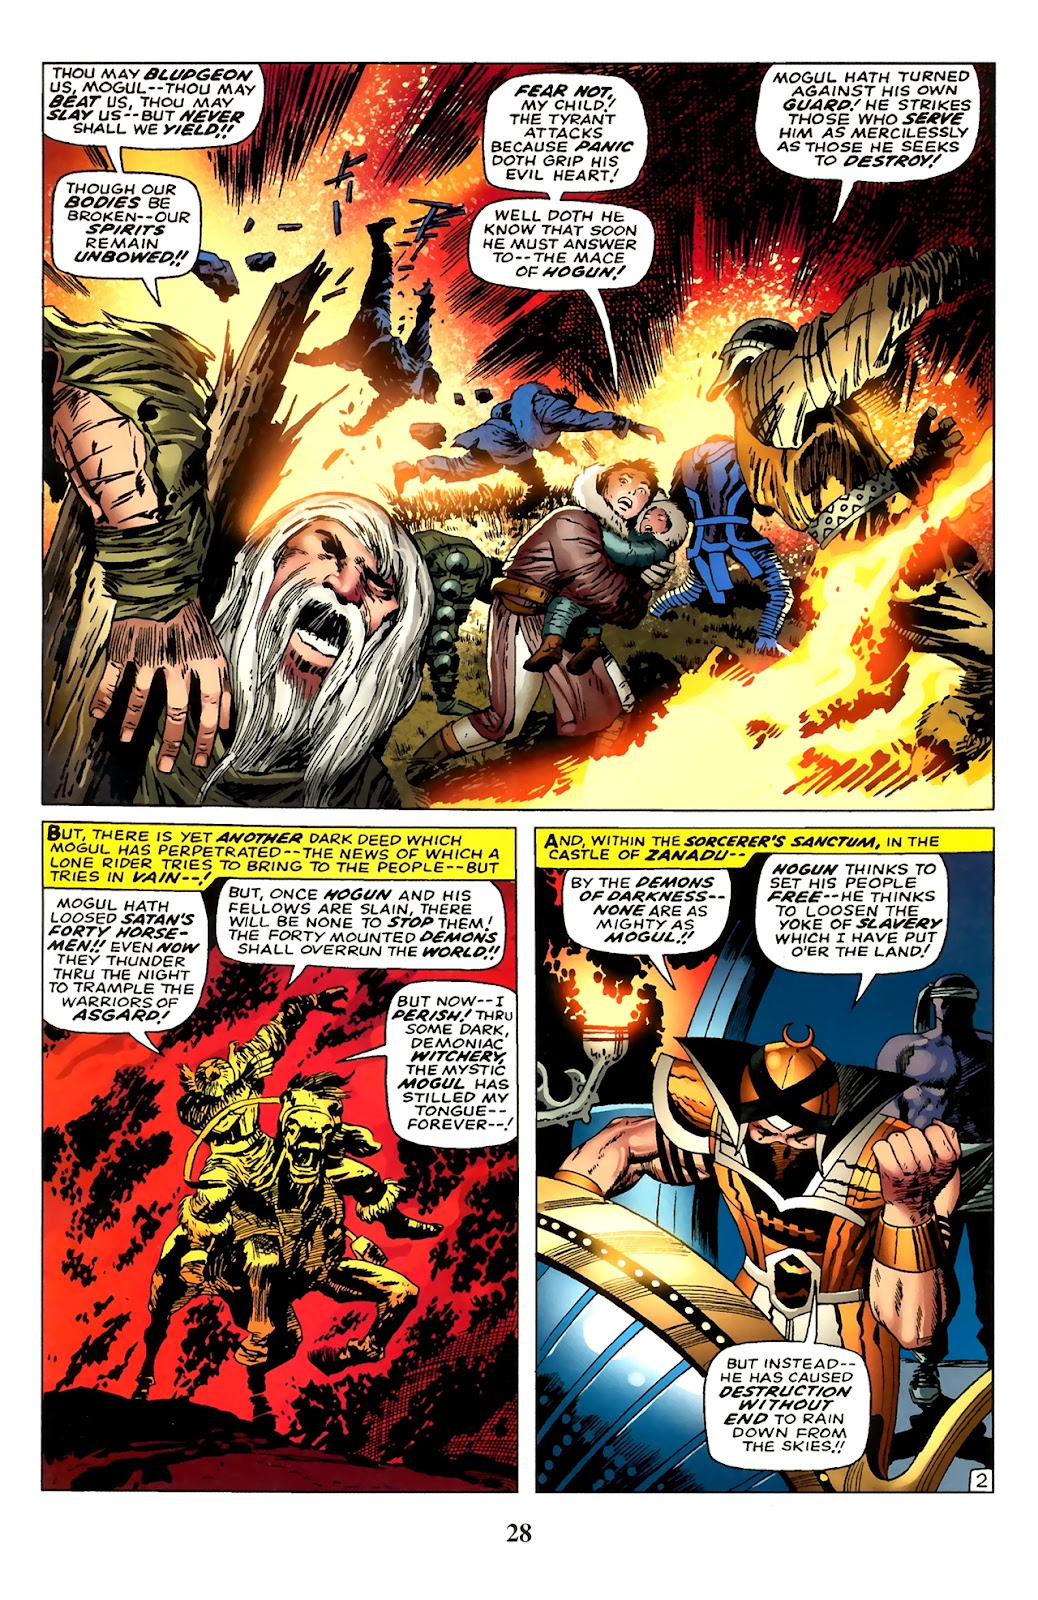 Thor: Tales of Asgard by Stan Lee & Jack Kirby issue 6 - Page 30